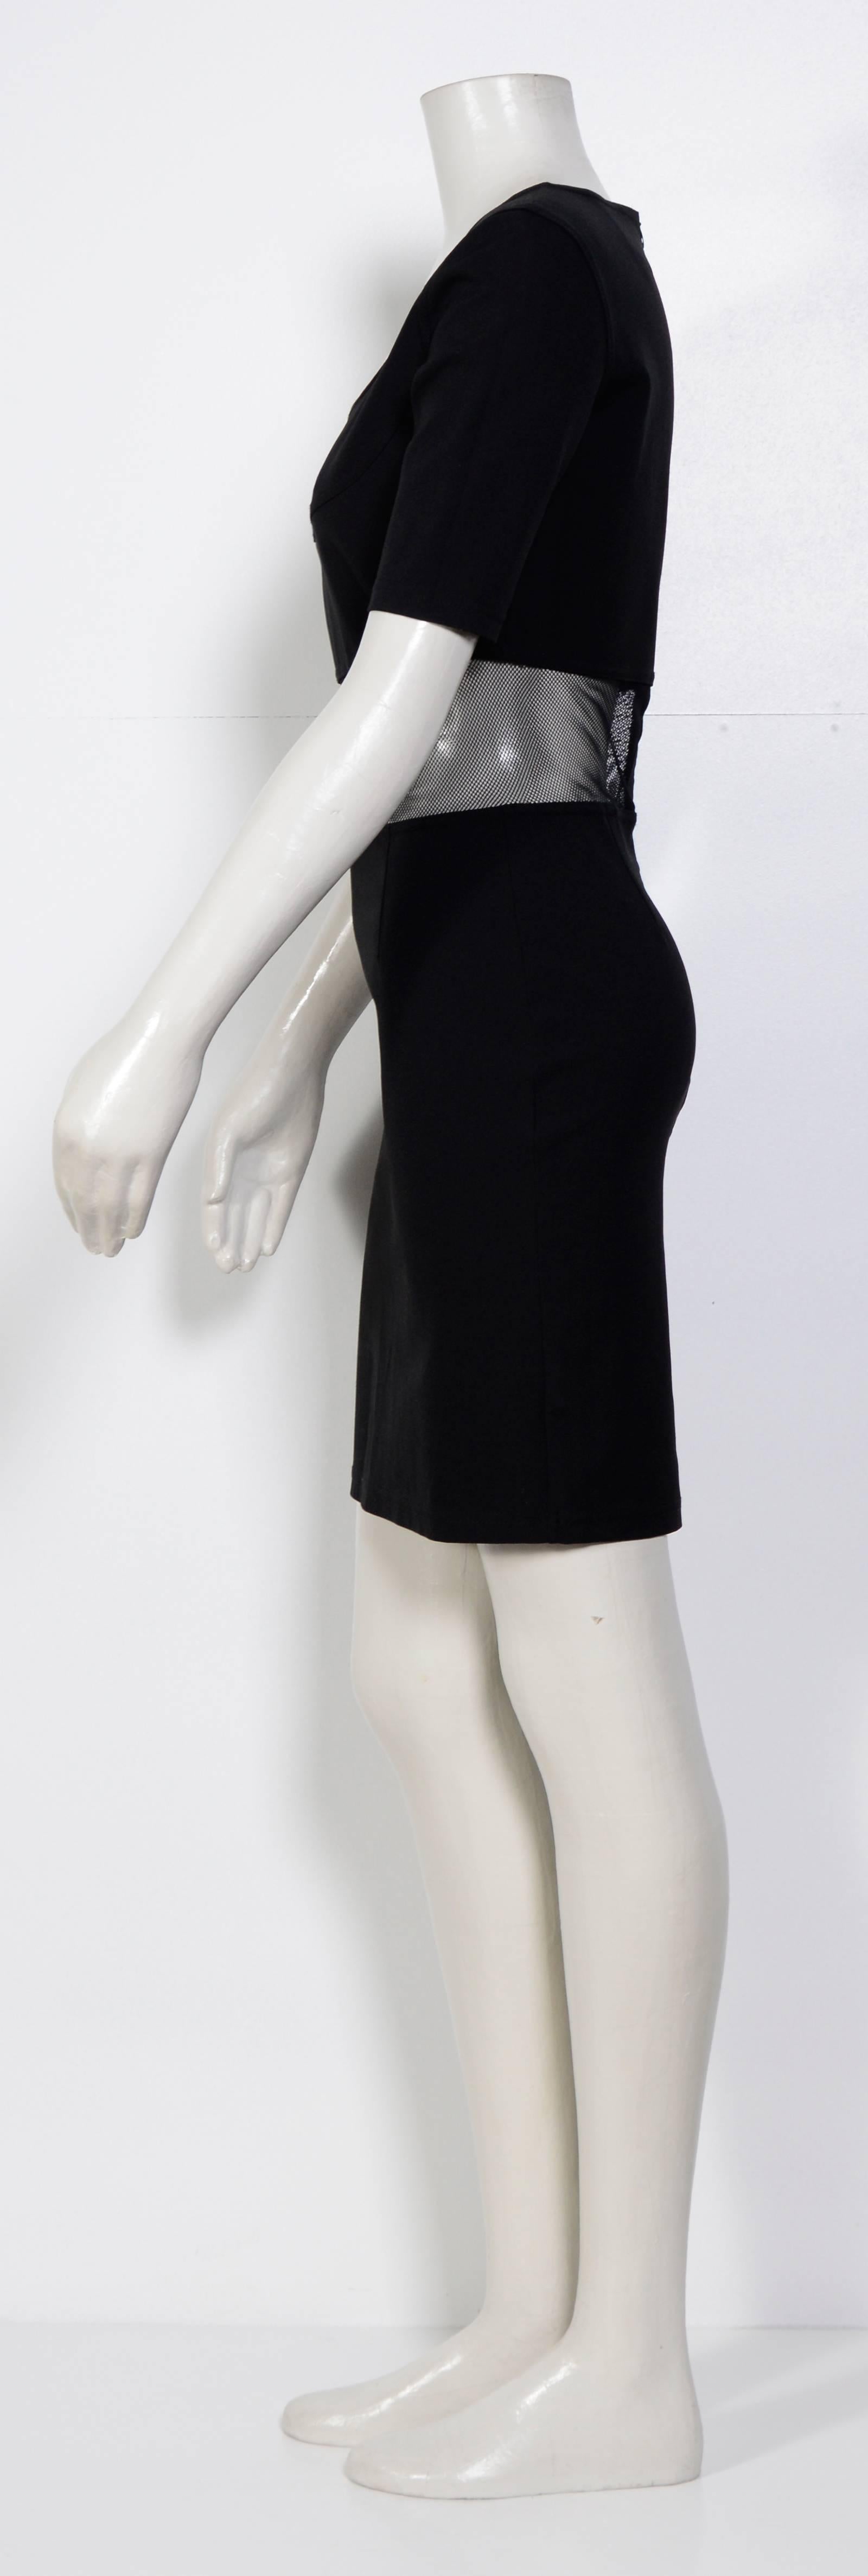 Black mesh panel dress from State Of Claude Montana Vintage featuring a scoop neck, short sleeves, a fitted silhouette, a short length and an invisible back zip fastening. 
Measurements are taken flat in inches without stretching the